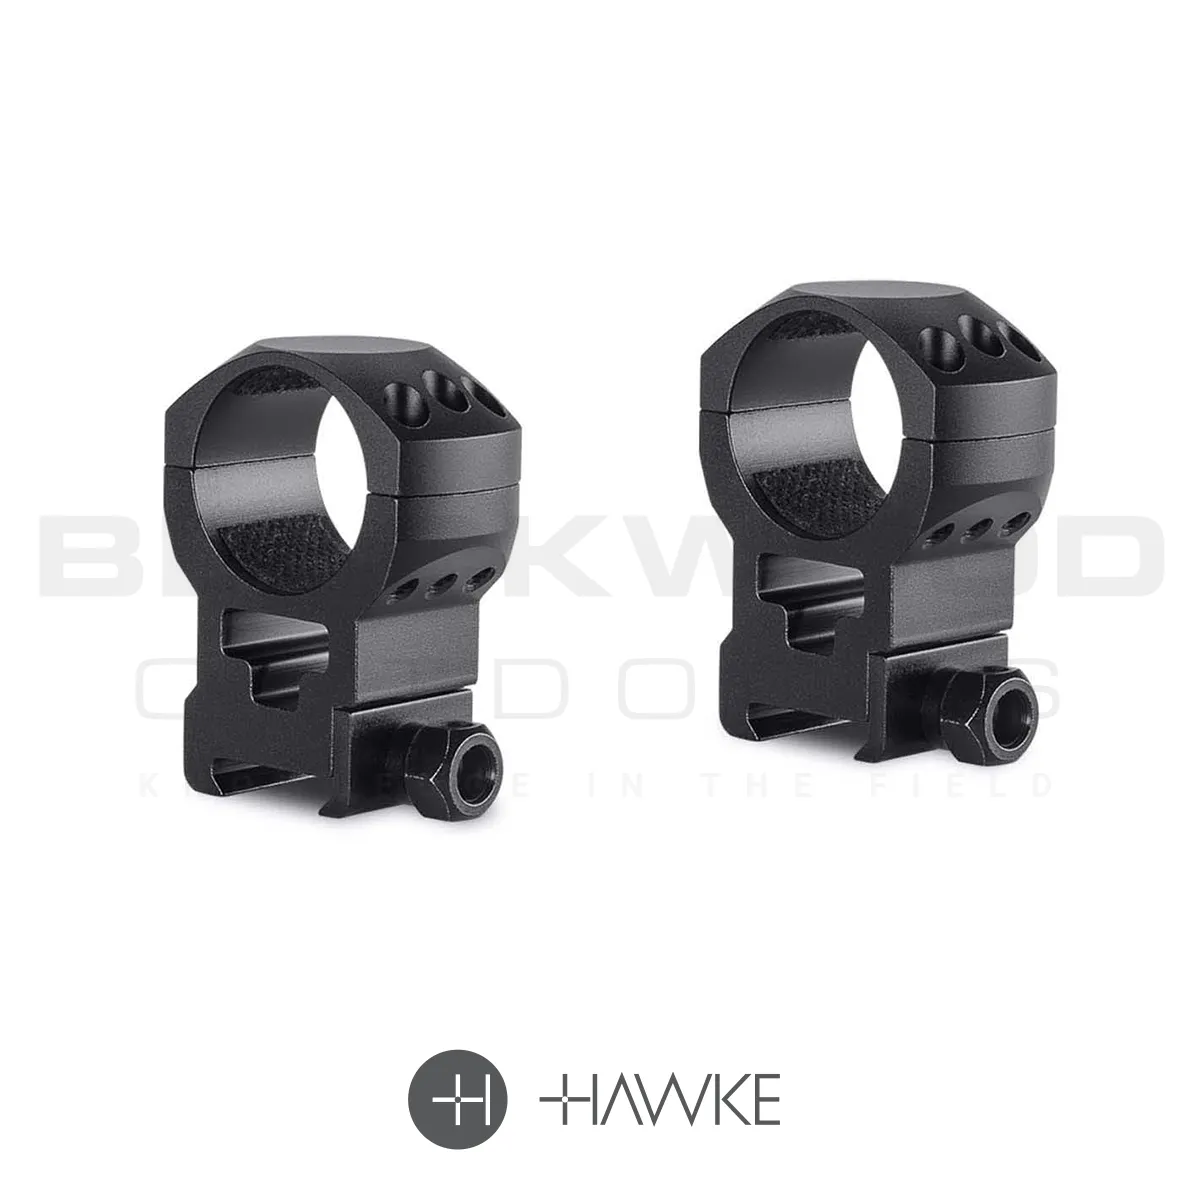 Hawke Tactical Extra High 30mm scope mounts for weaver or picatinny rail.